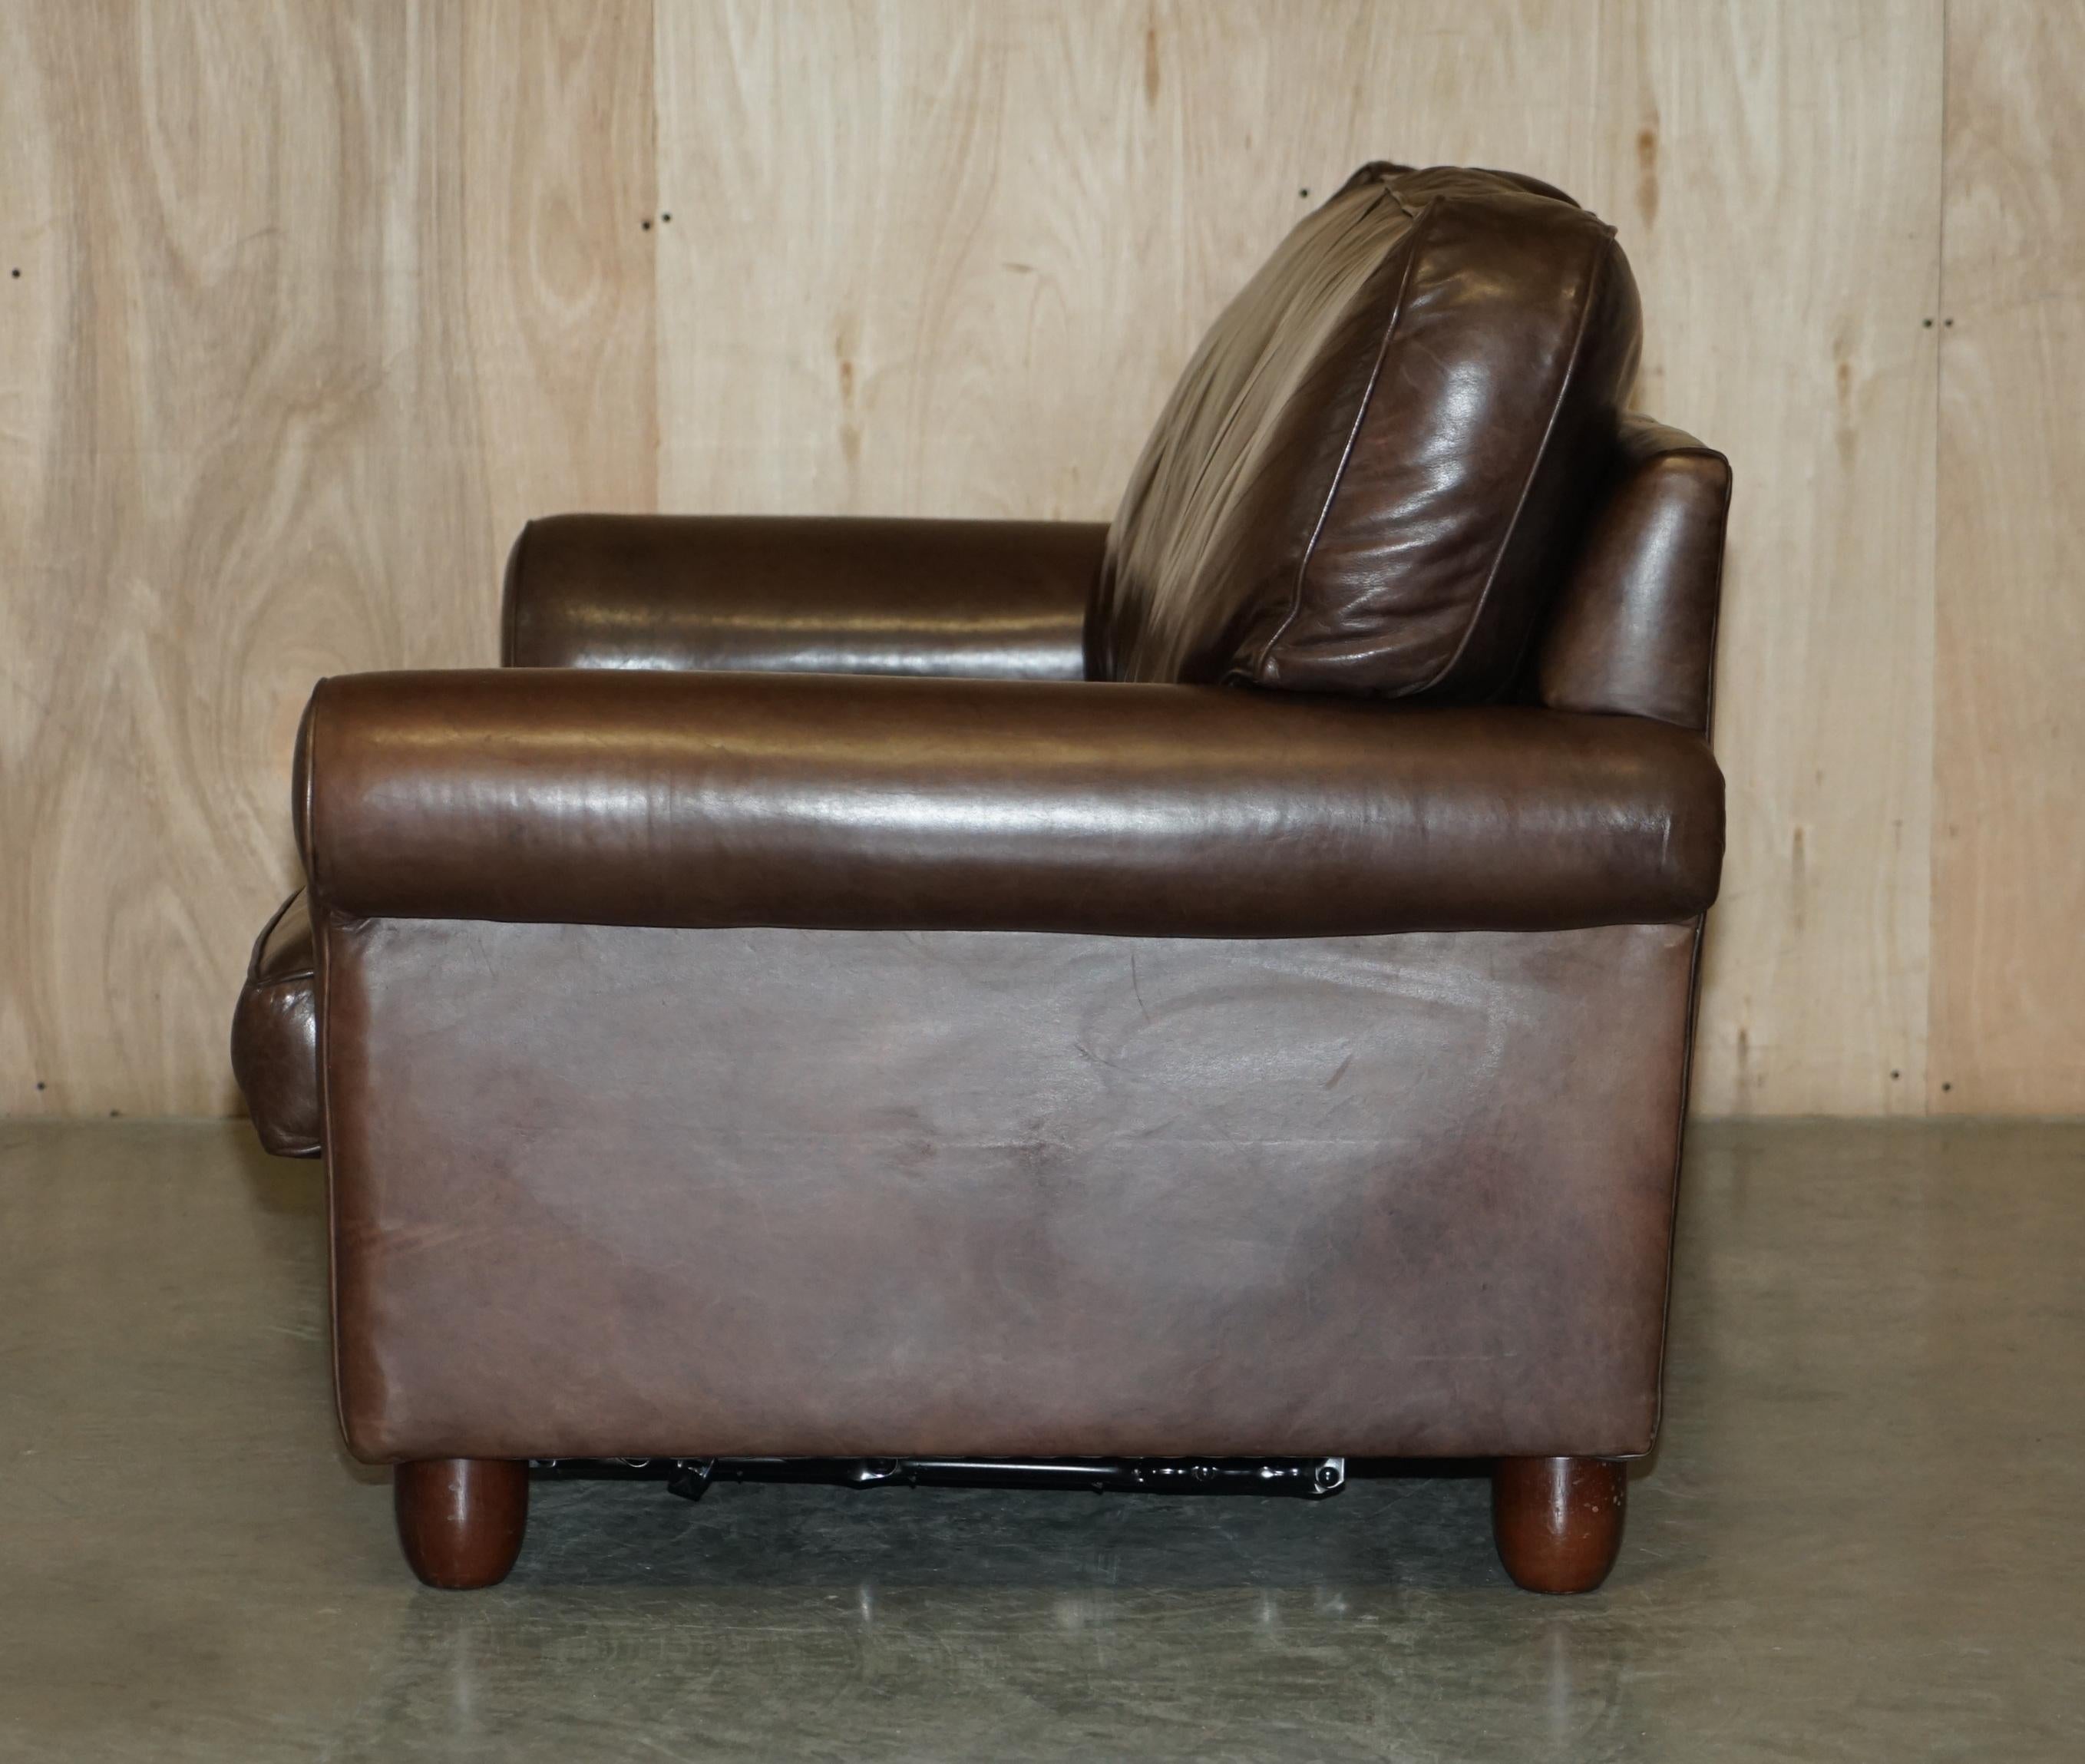 Lovely Heritage Brown Leather Laura Ashley Mortimer Sofabed in Very Nice Order For Sale 4